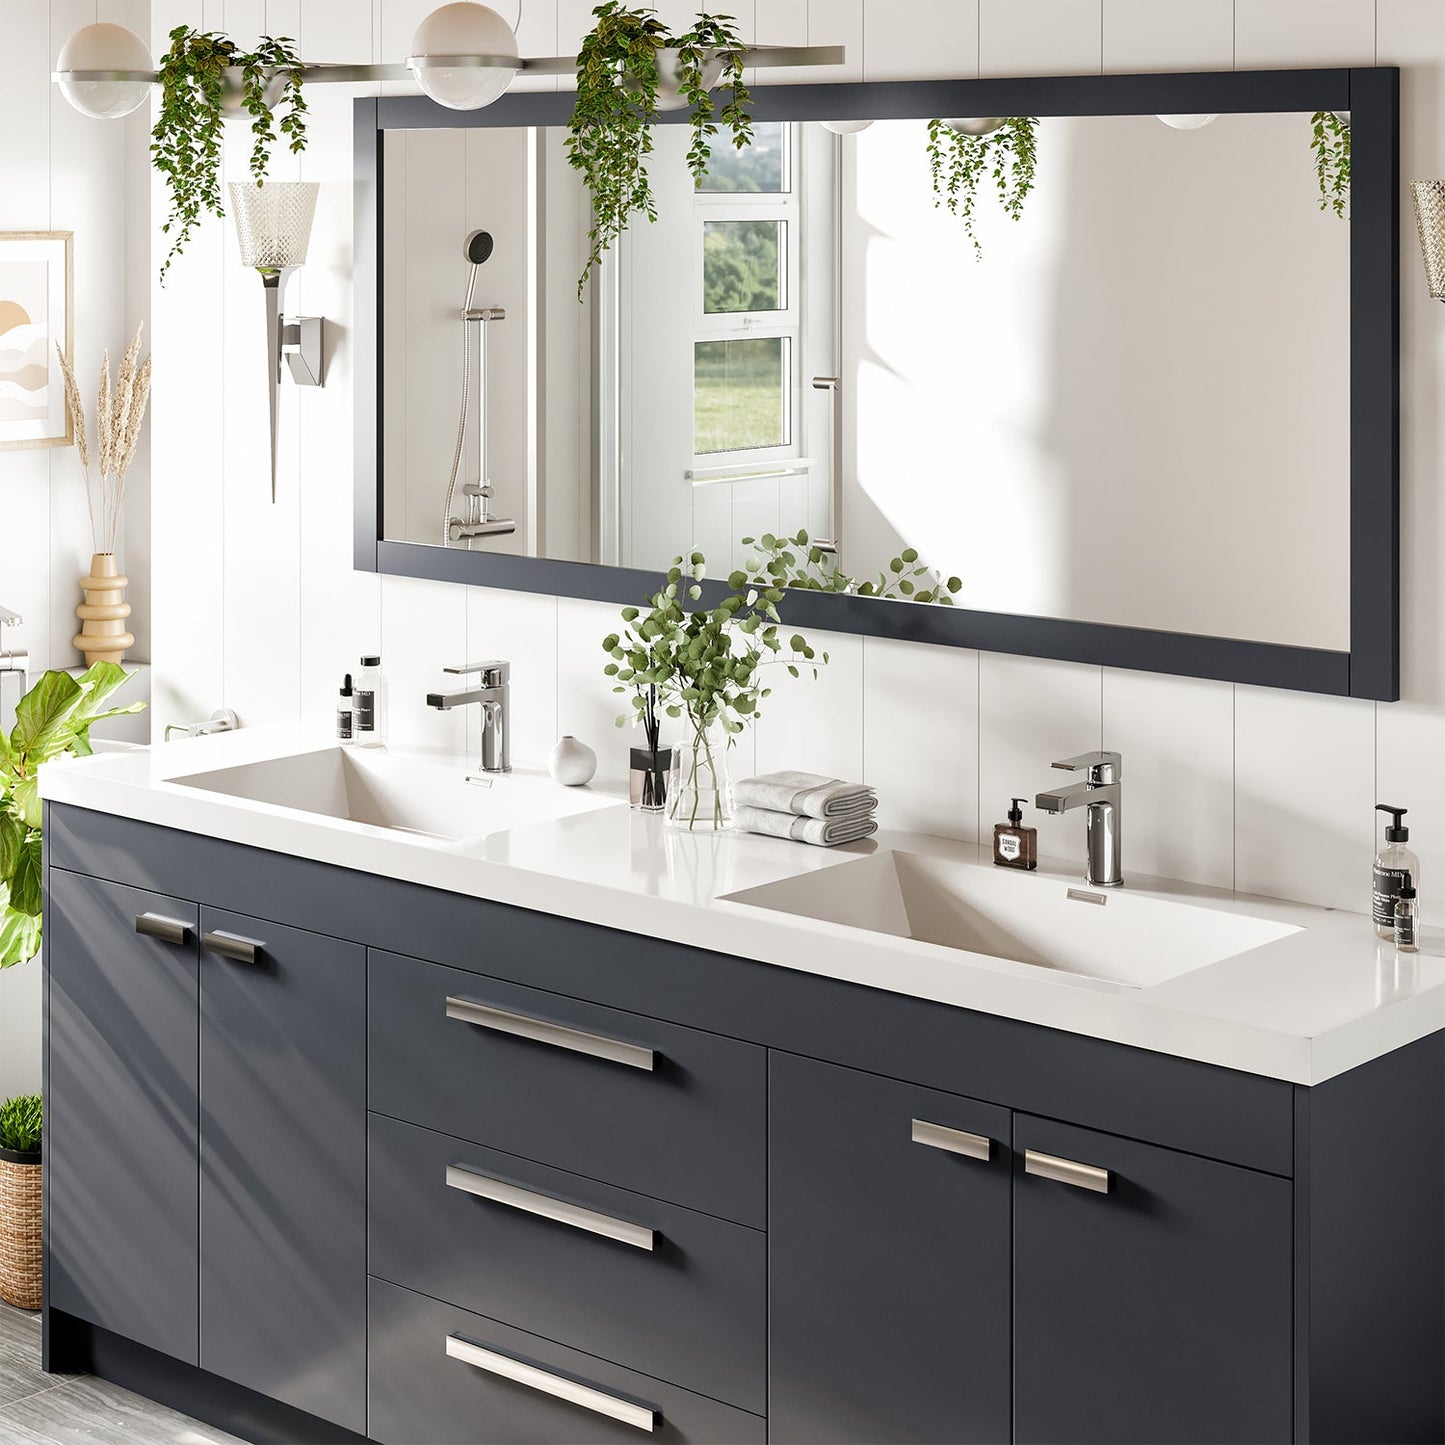 Lugano 84"W x 20" D Gray Double Sink Bathroom Vanity with Acrylic Countertop and Integrated Sink